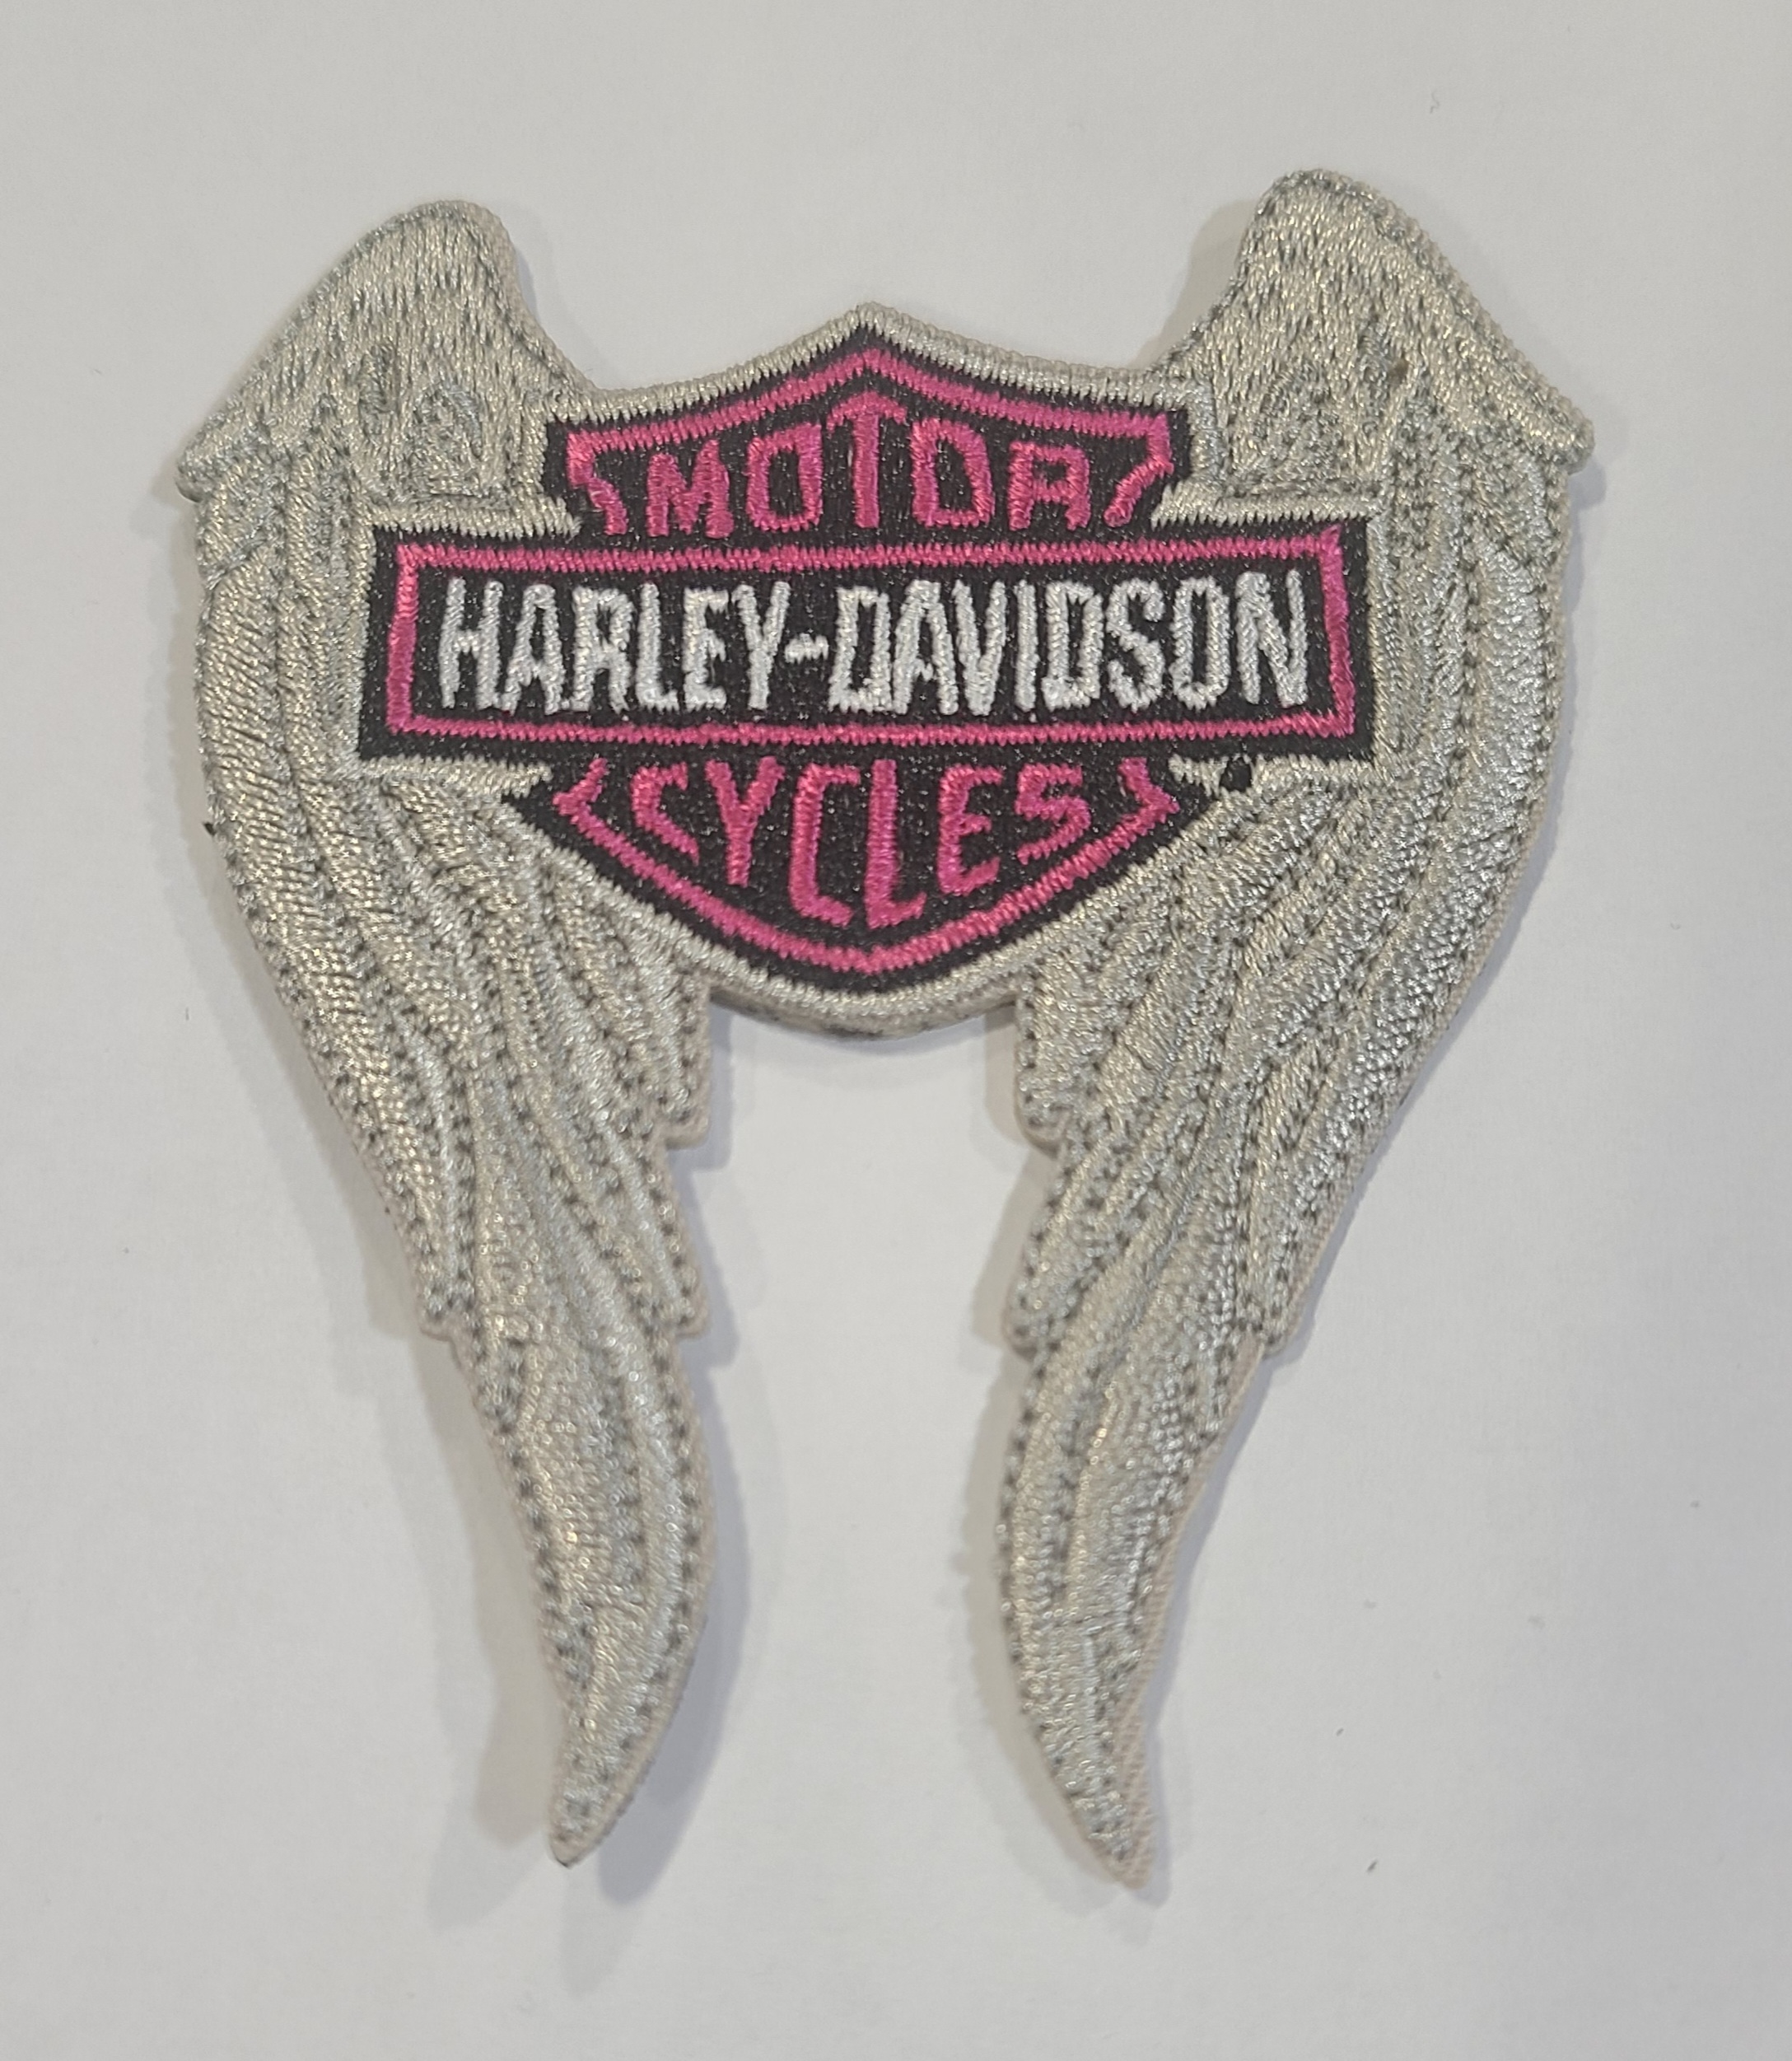 HARLEY DAVIDSON PATCH 11” H-D PINK B&S WINGS